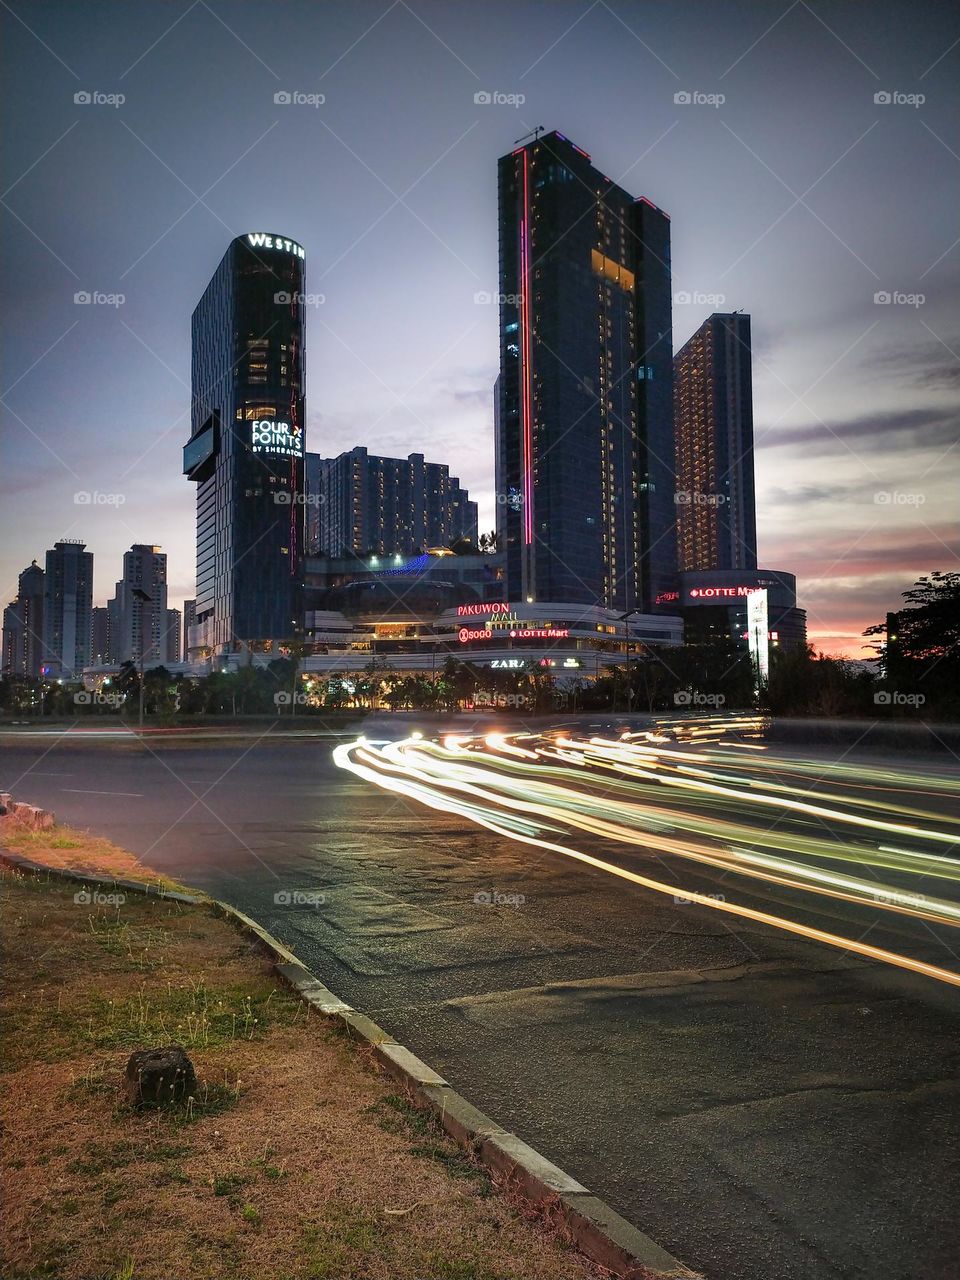 The story of twilight in the corner of the city of Surabaya with its dashing skyscrapers in the province of East Java, Indonesia